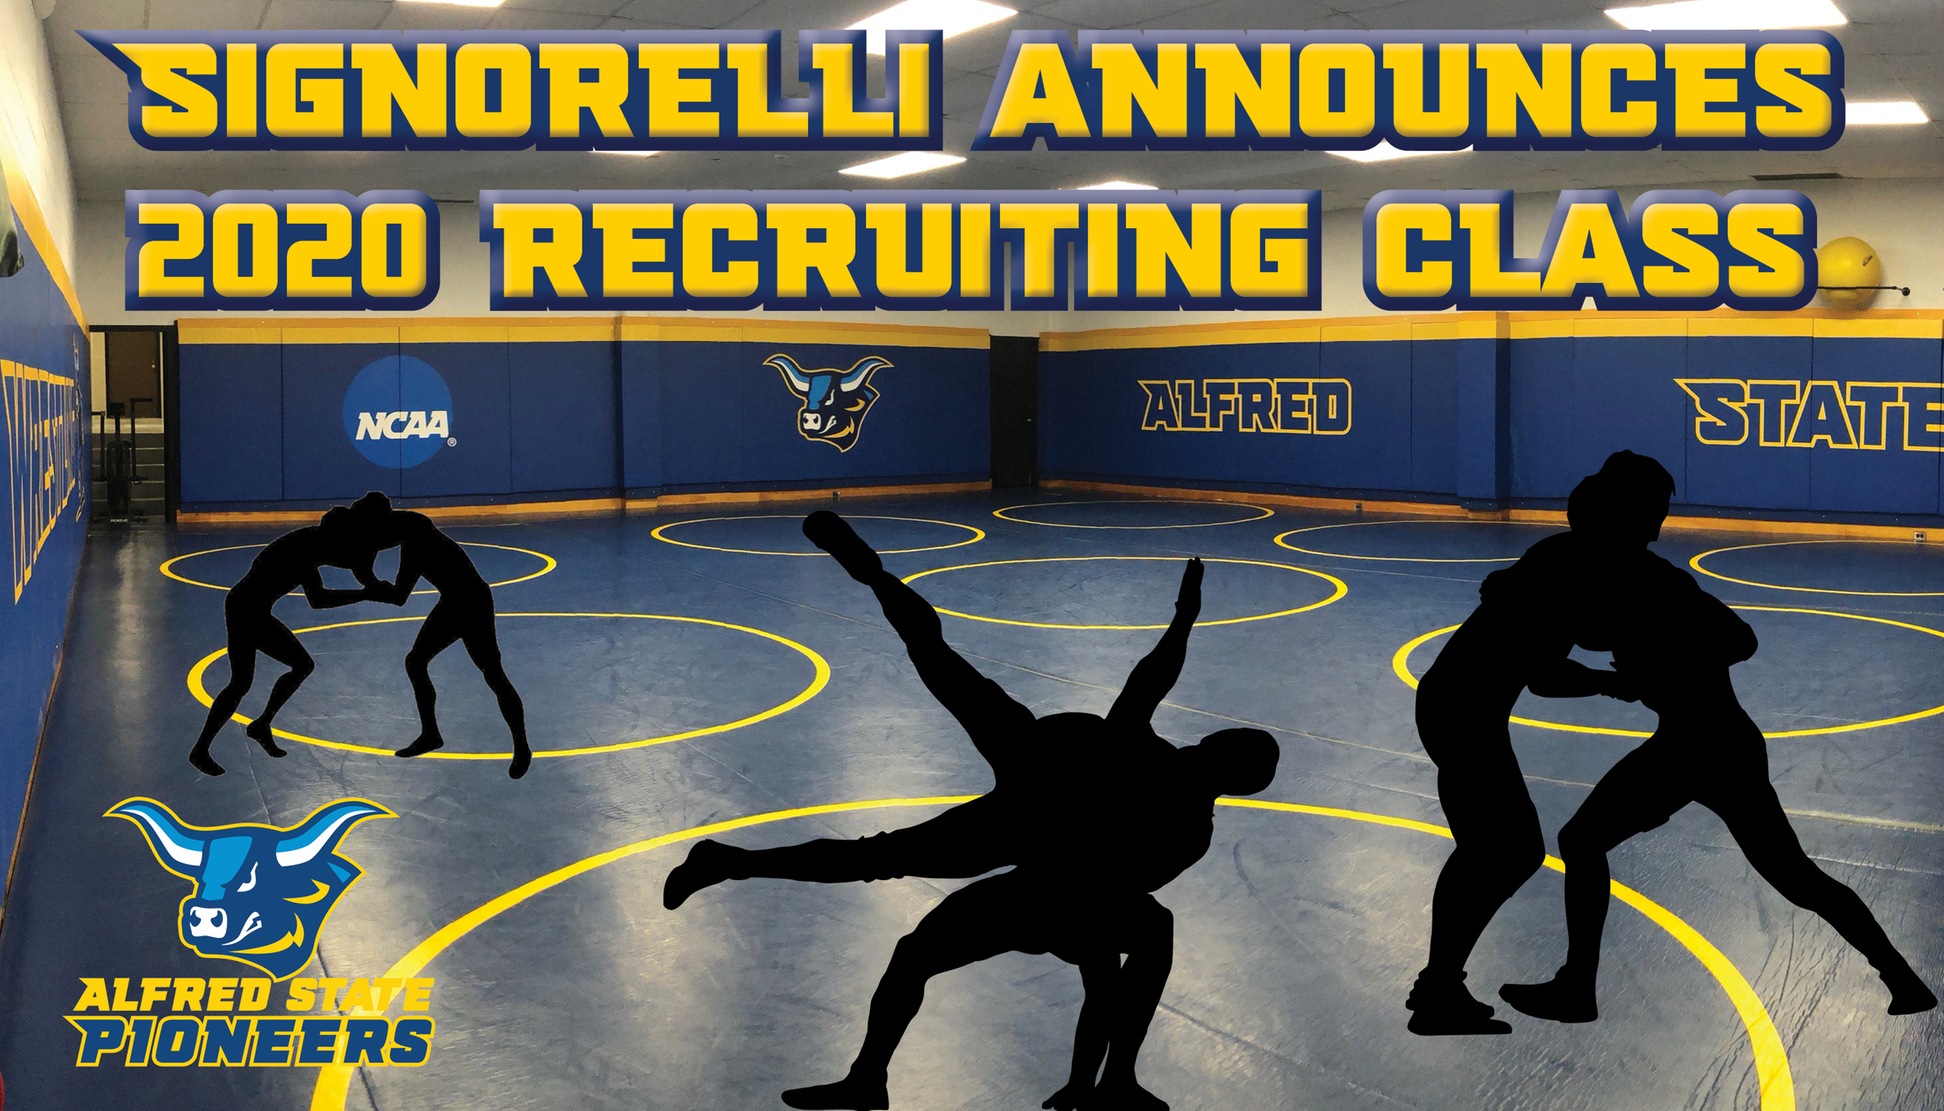 The Wrestling team announced the 2020 Recruiting Class - 27 members!